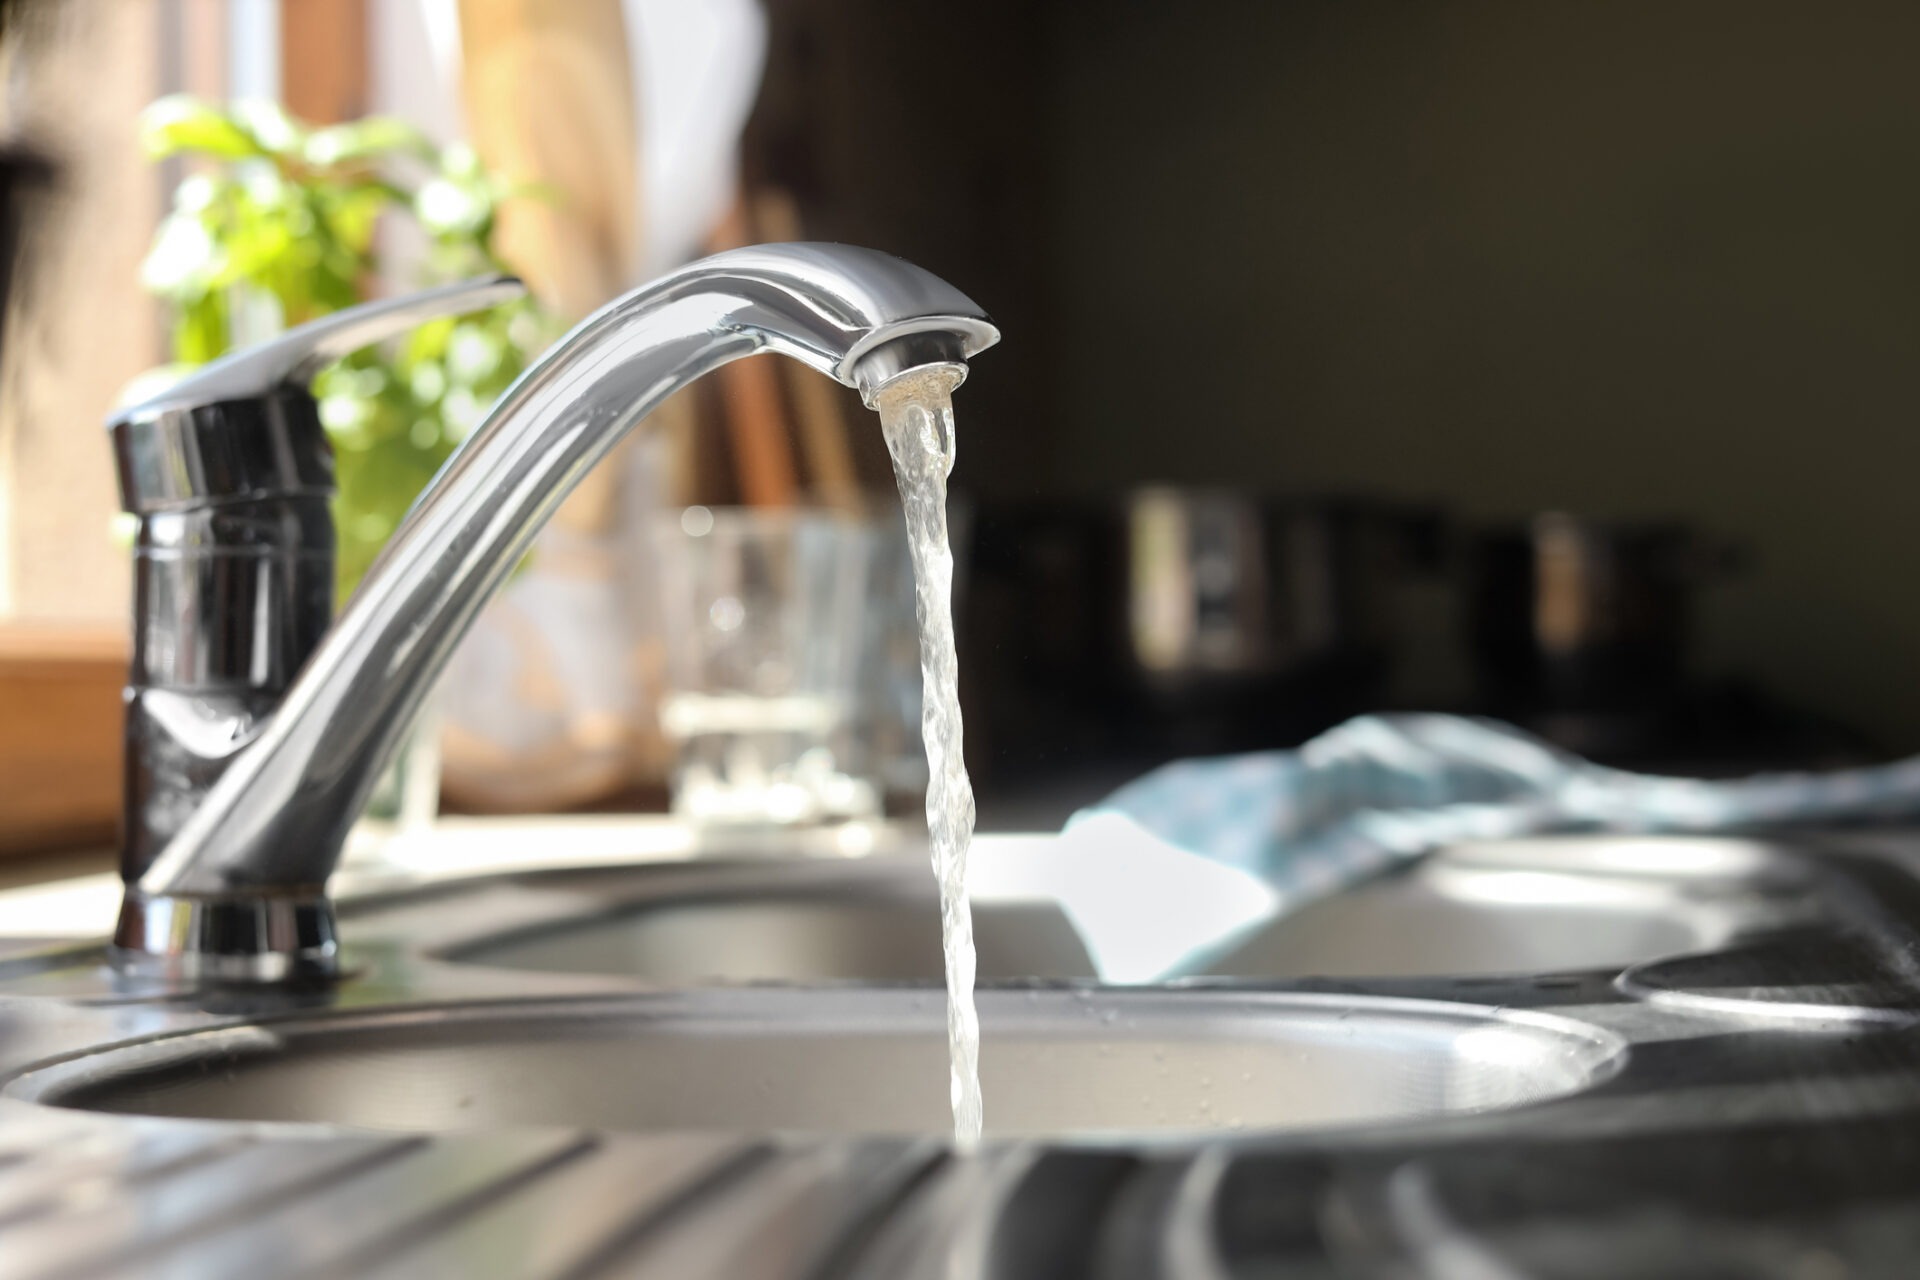 A stream of water flows from a silver kitchen faucet into a stainless steel sink, with natural light illuminating the scene and plant in the background.